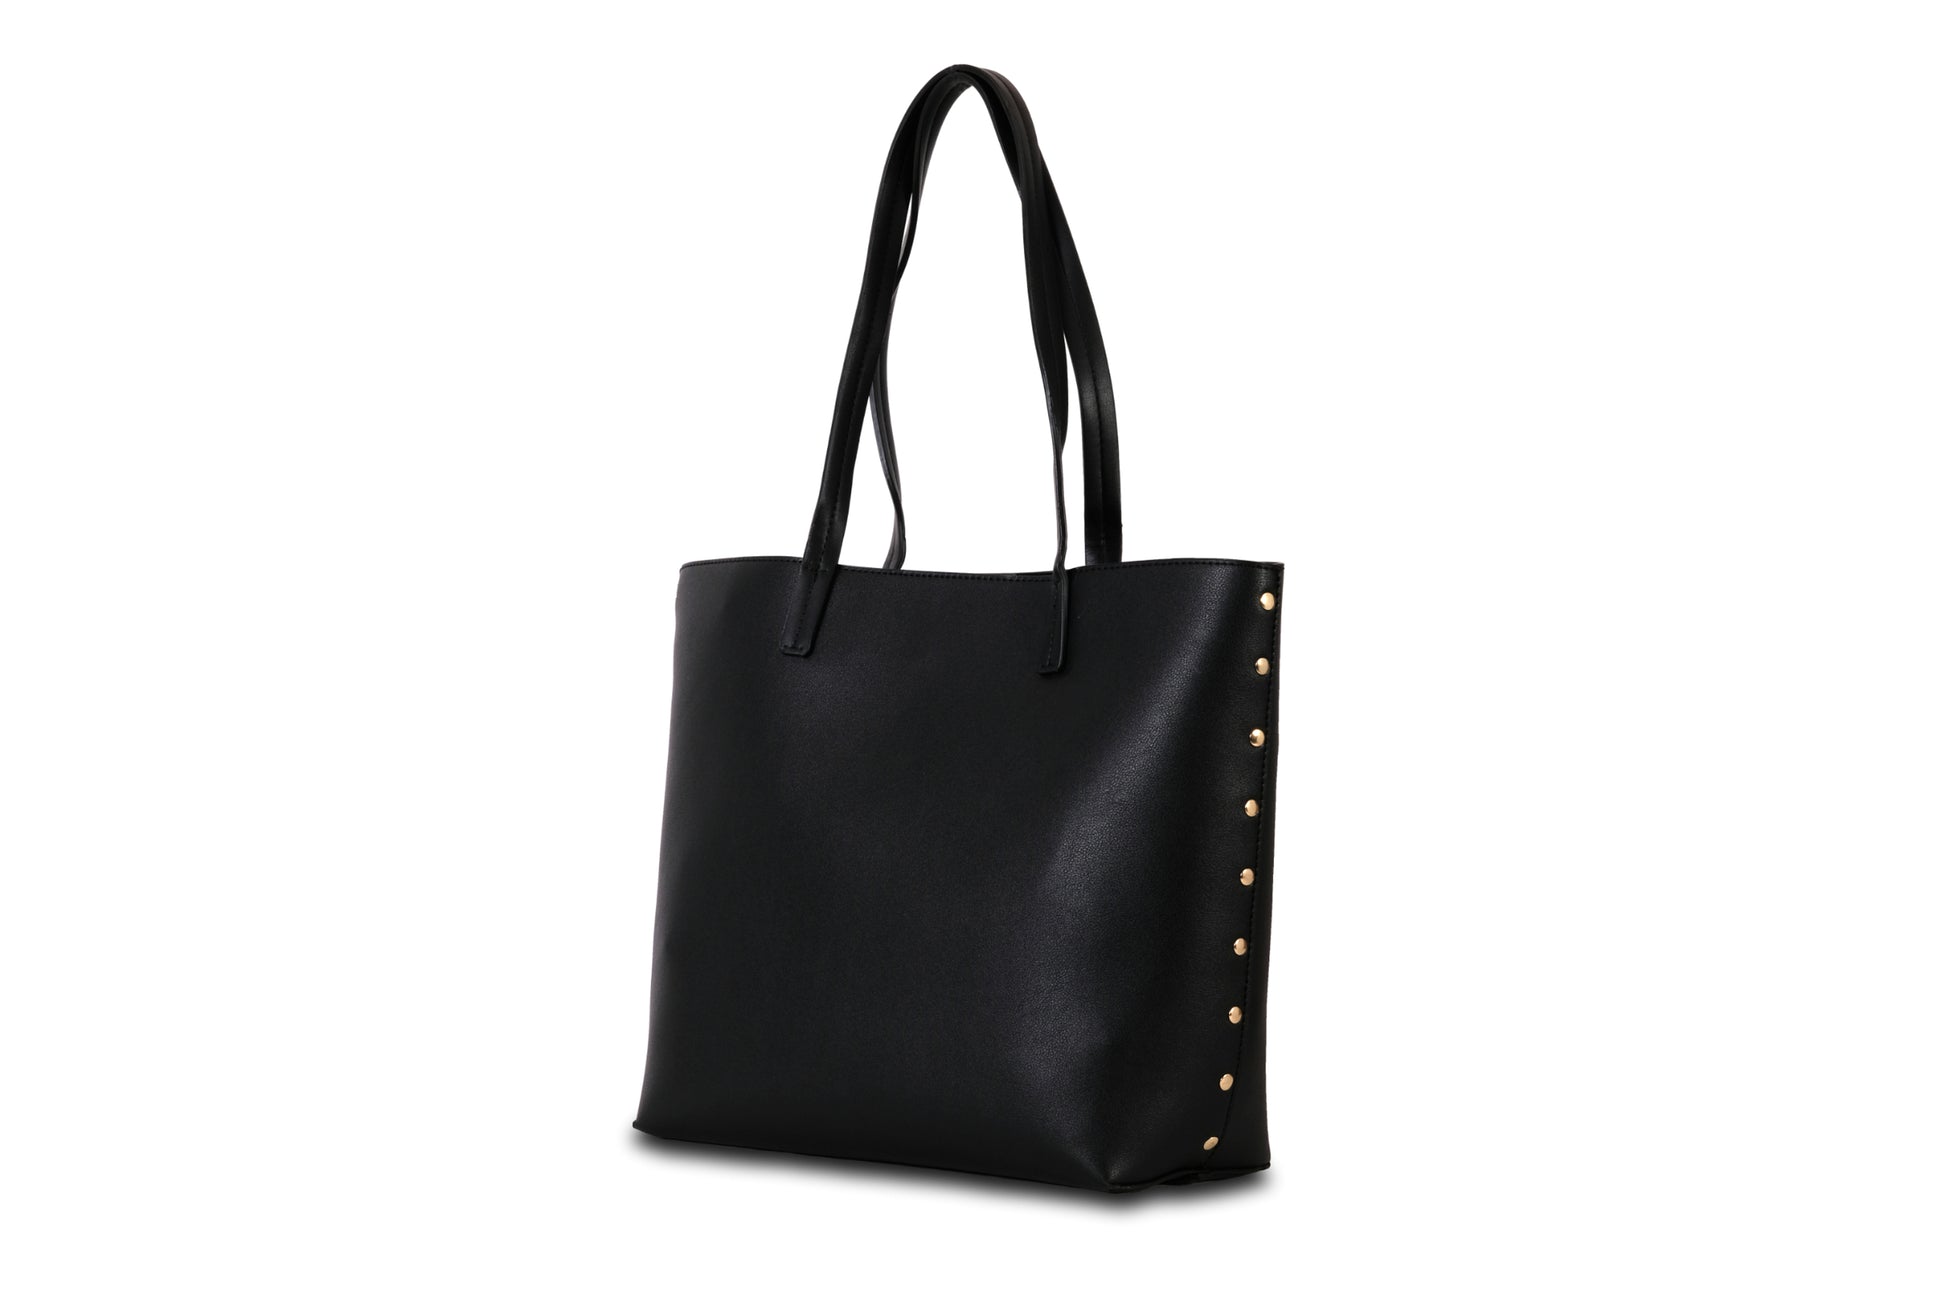 Rowi Pebble Grain Faux Leather Midnight Black Tote Bag Handbag made by Dewi Maya side view available at the best boutique in Upstate South Carolina Spartanburg Greenville Dewi Maya Boutique